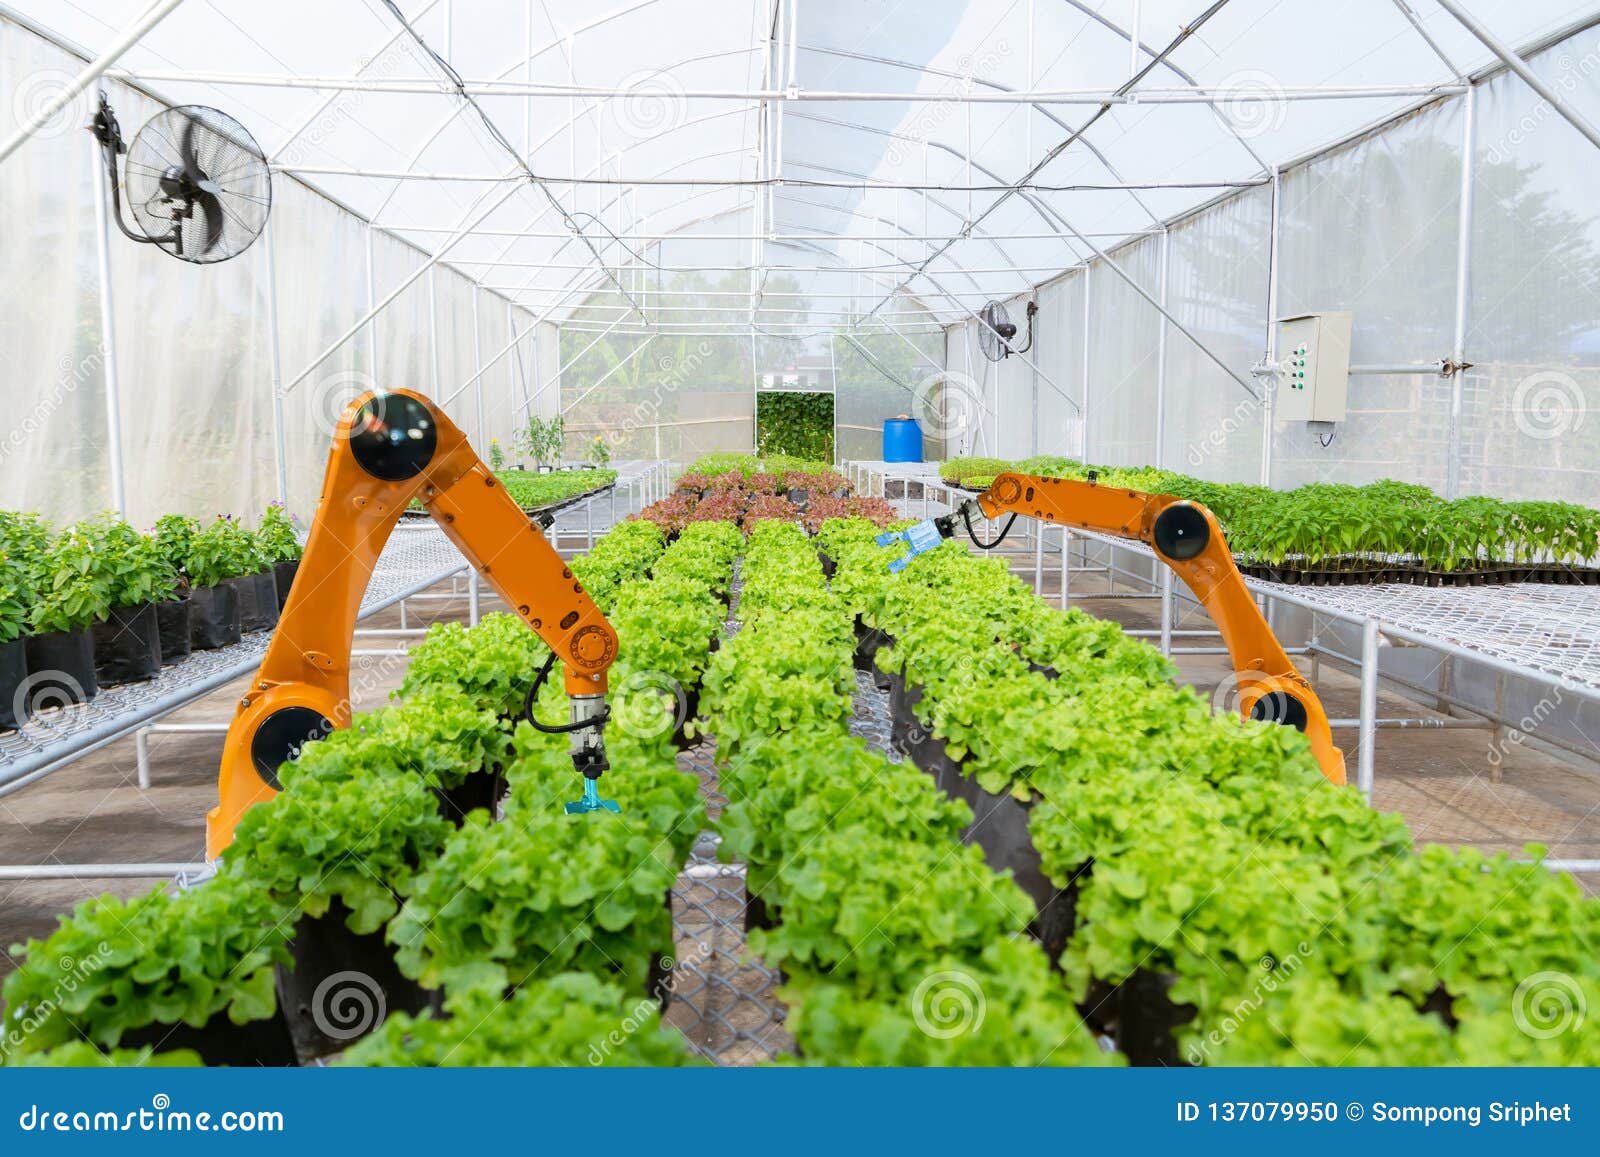 smart robotic farmers harvest in agriculture futuristic robot automation to work technology